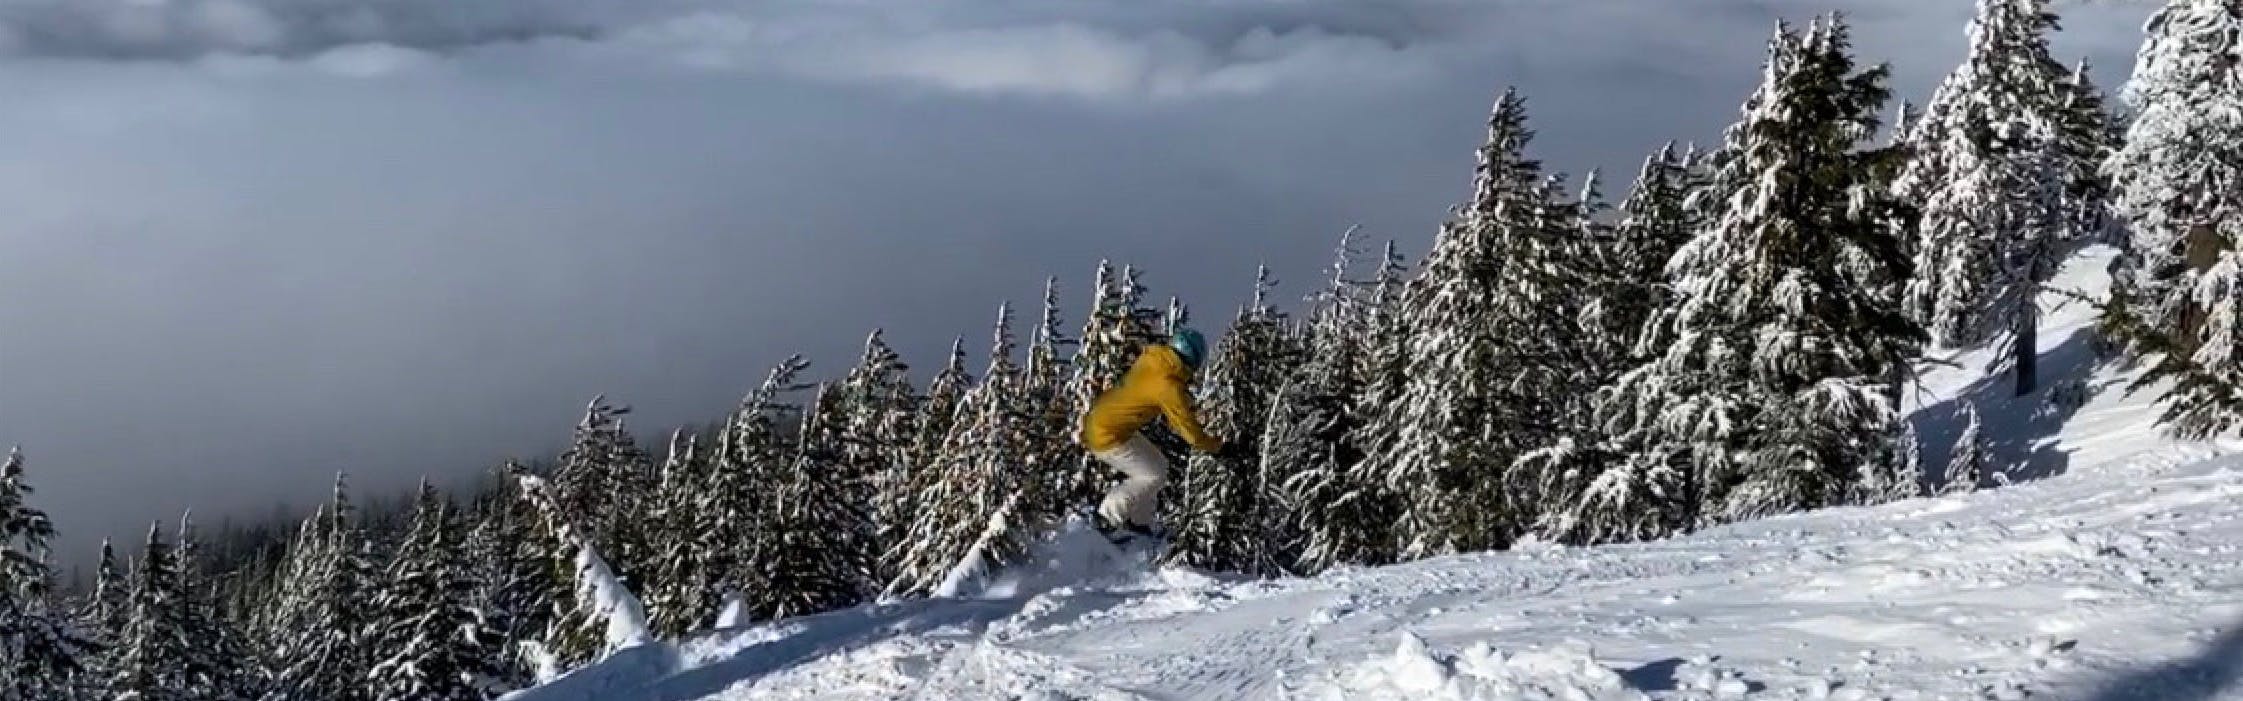 A snowboarder jumps off a small jump. There are trees and clouds in the background.